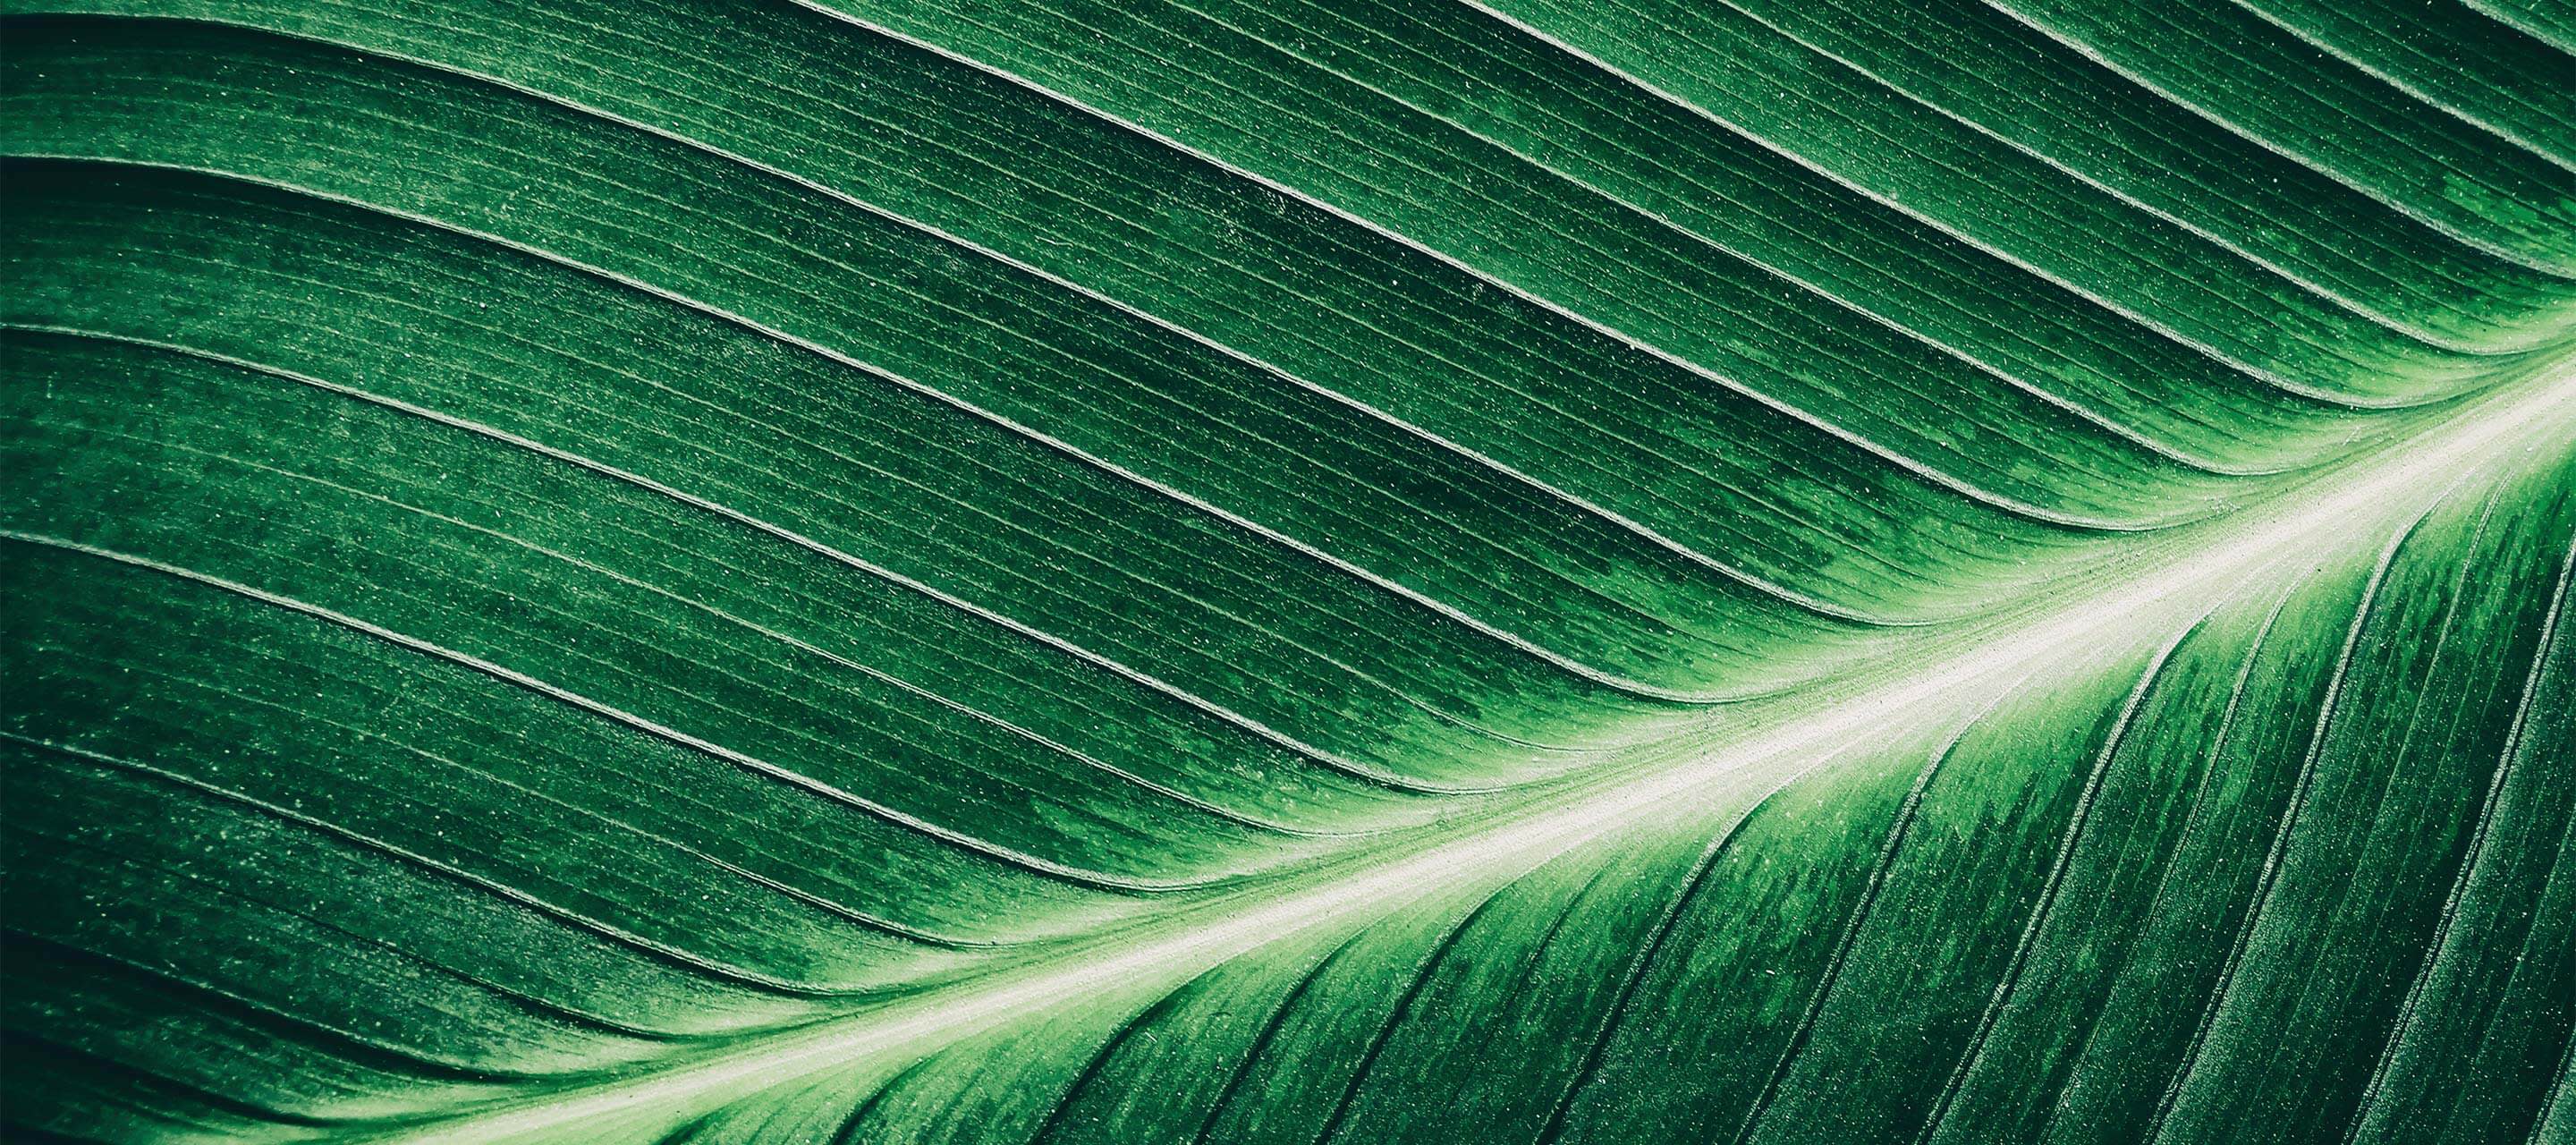 zoomed in picture of leaf